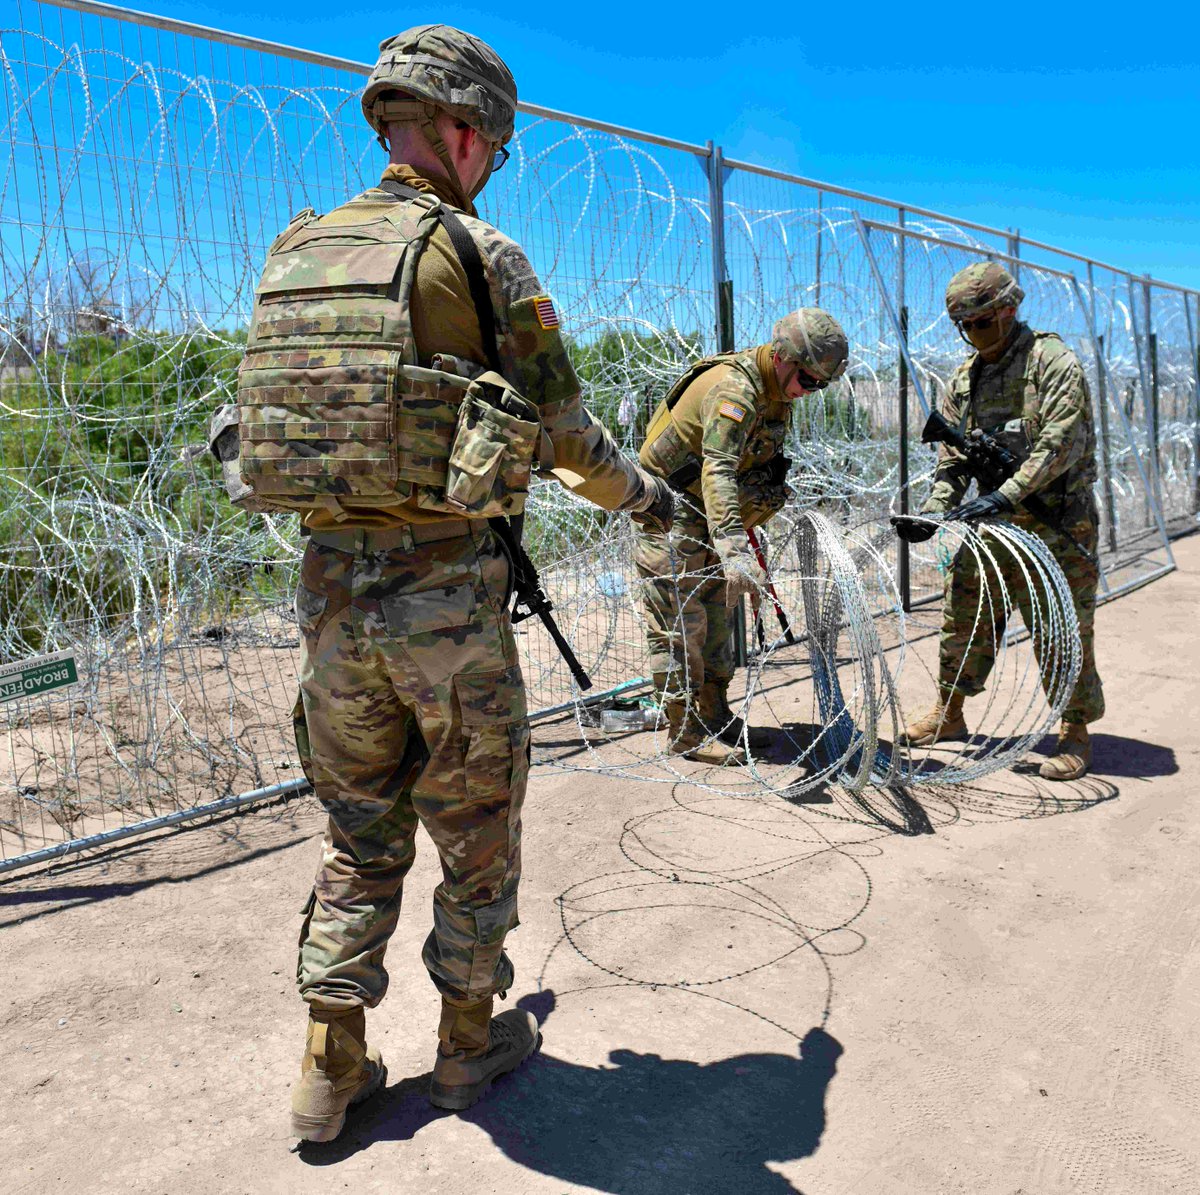 Texas National Guard Special Response Teams repair breaches in anti-climb barrier to prevent illegal border crossings into the US.
#OperationLoneStar